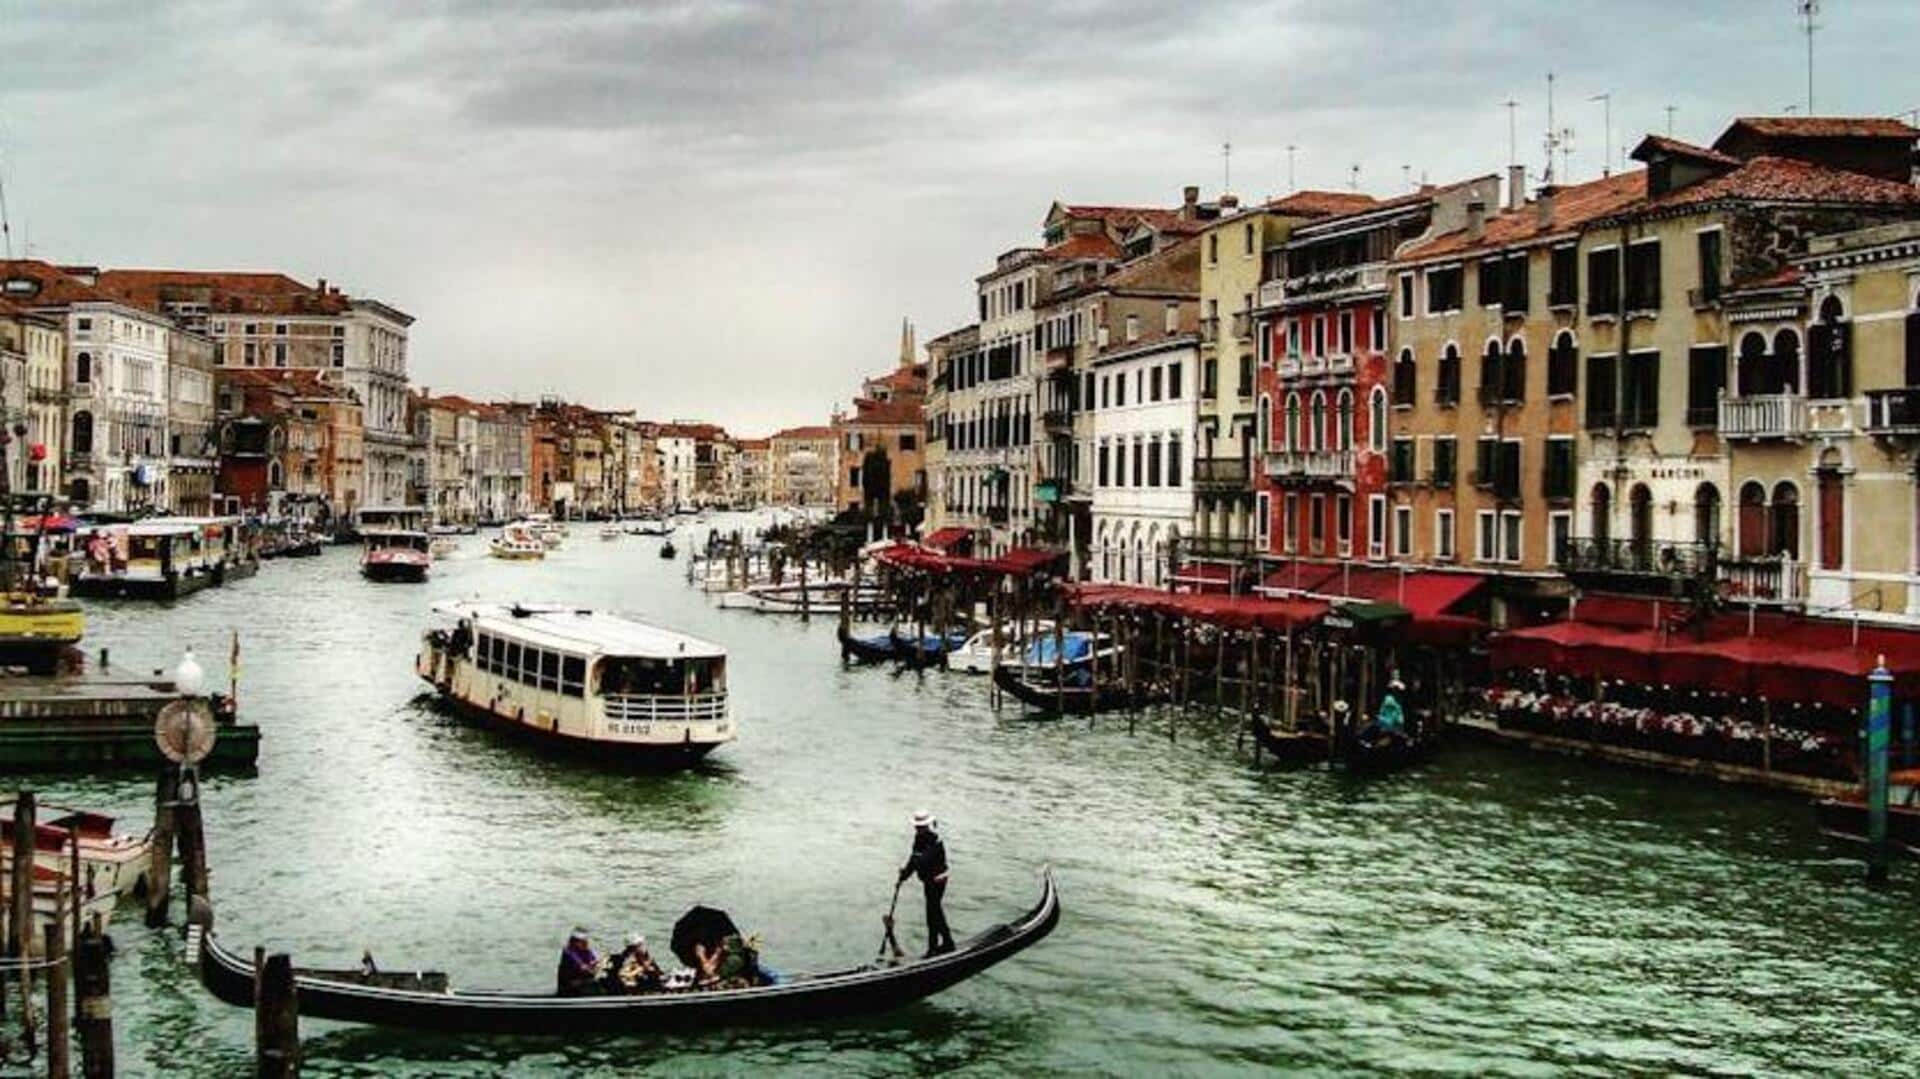 Head over to Venice's secret waterways for an unforgettable trip